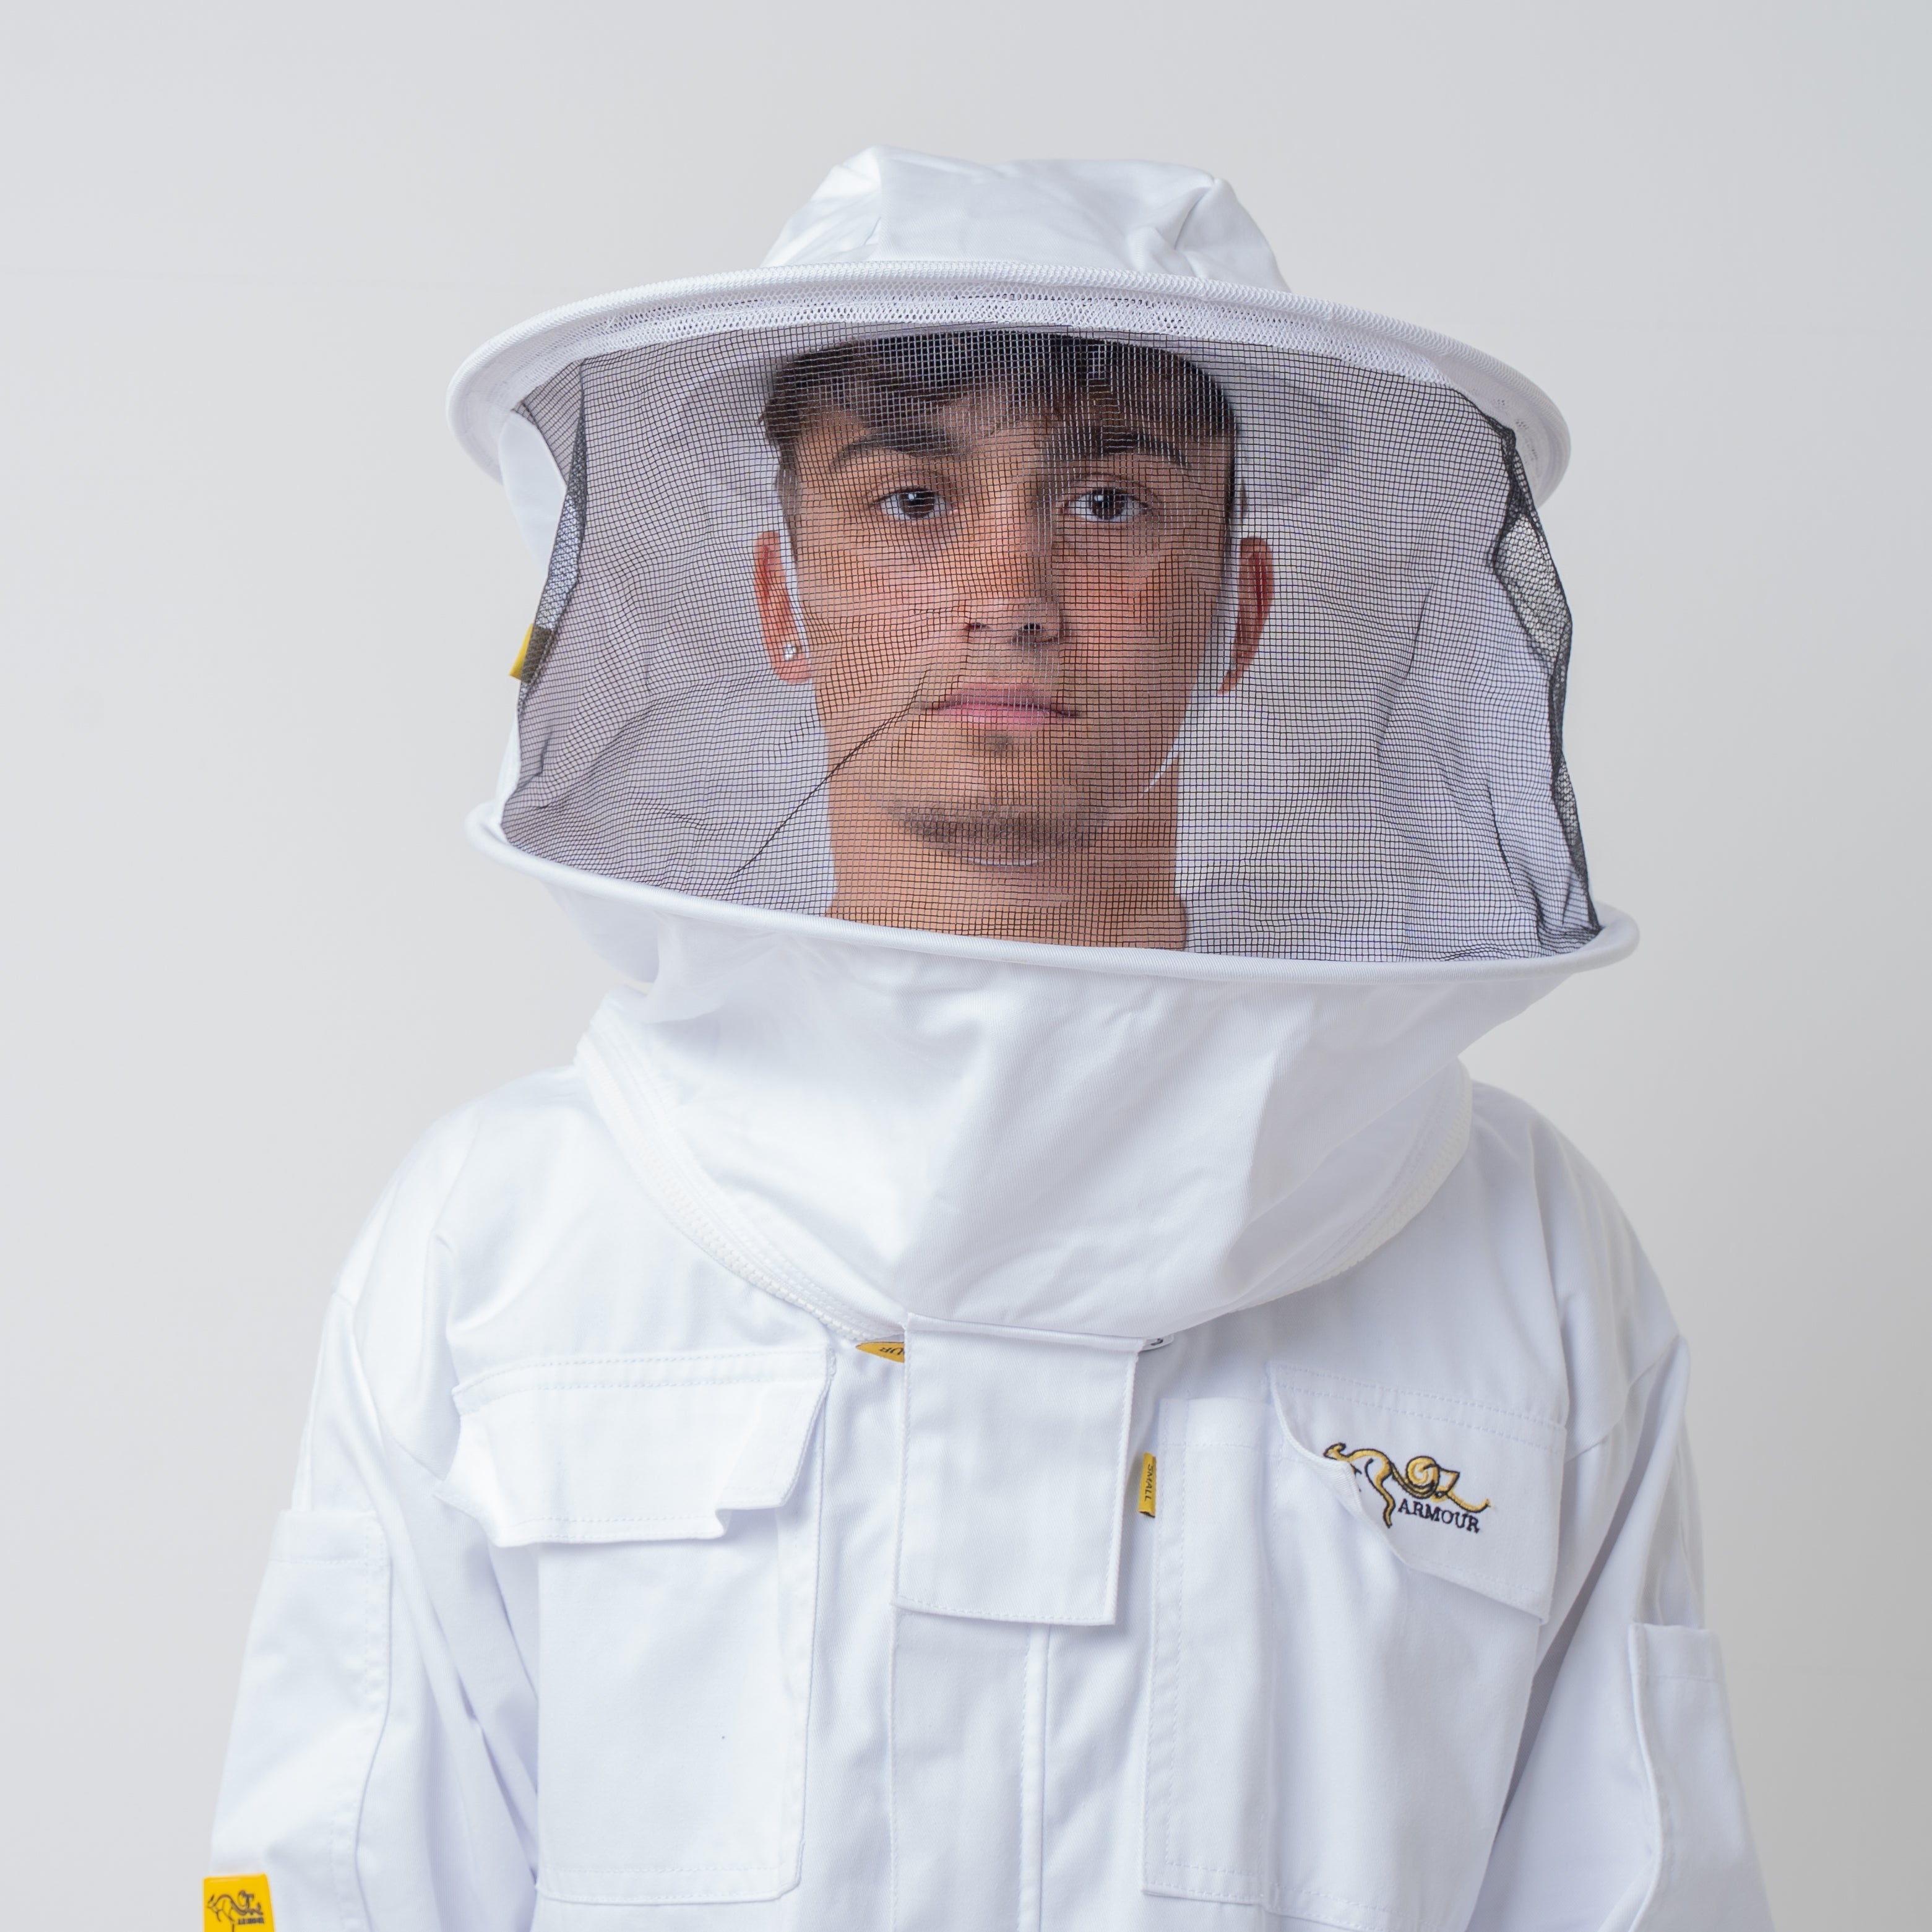  Beekeeping Suit With Fencing Veil - Close Up